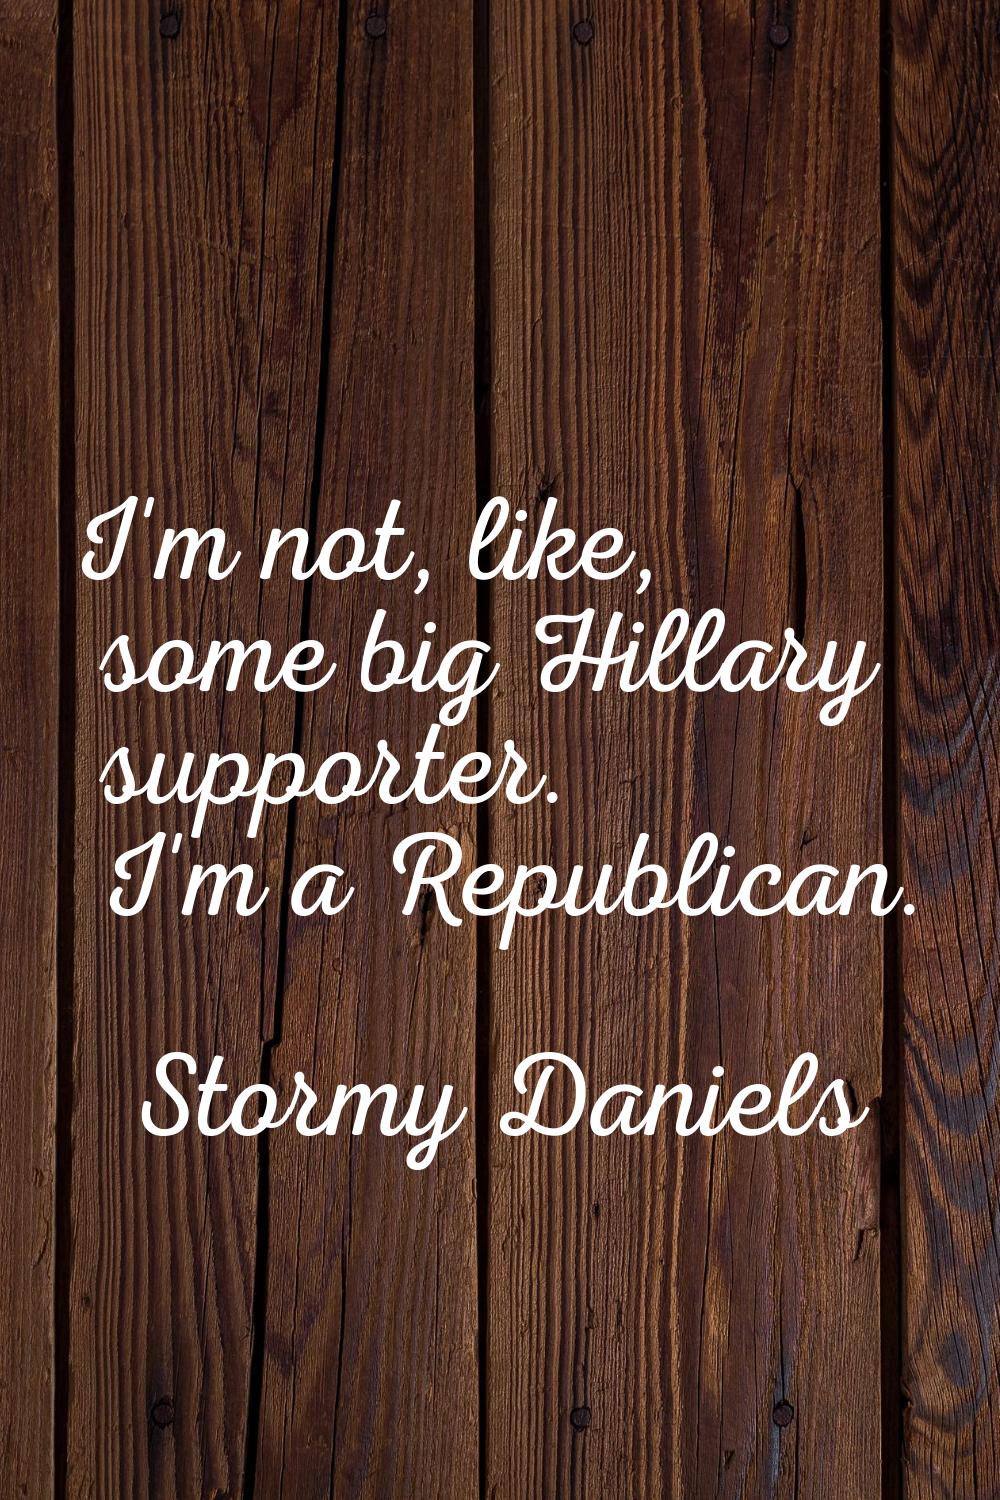 I'm not, like, some big Hillary supporter. I'm a Republican.